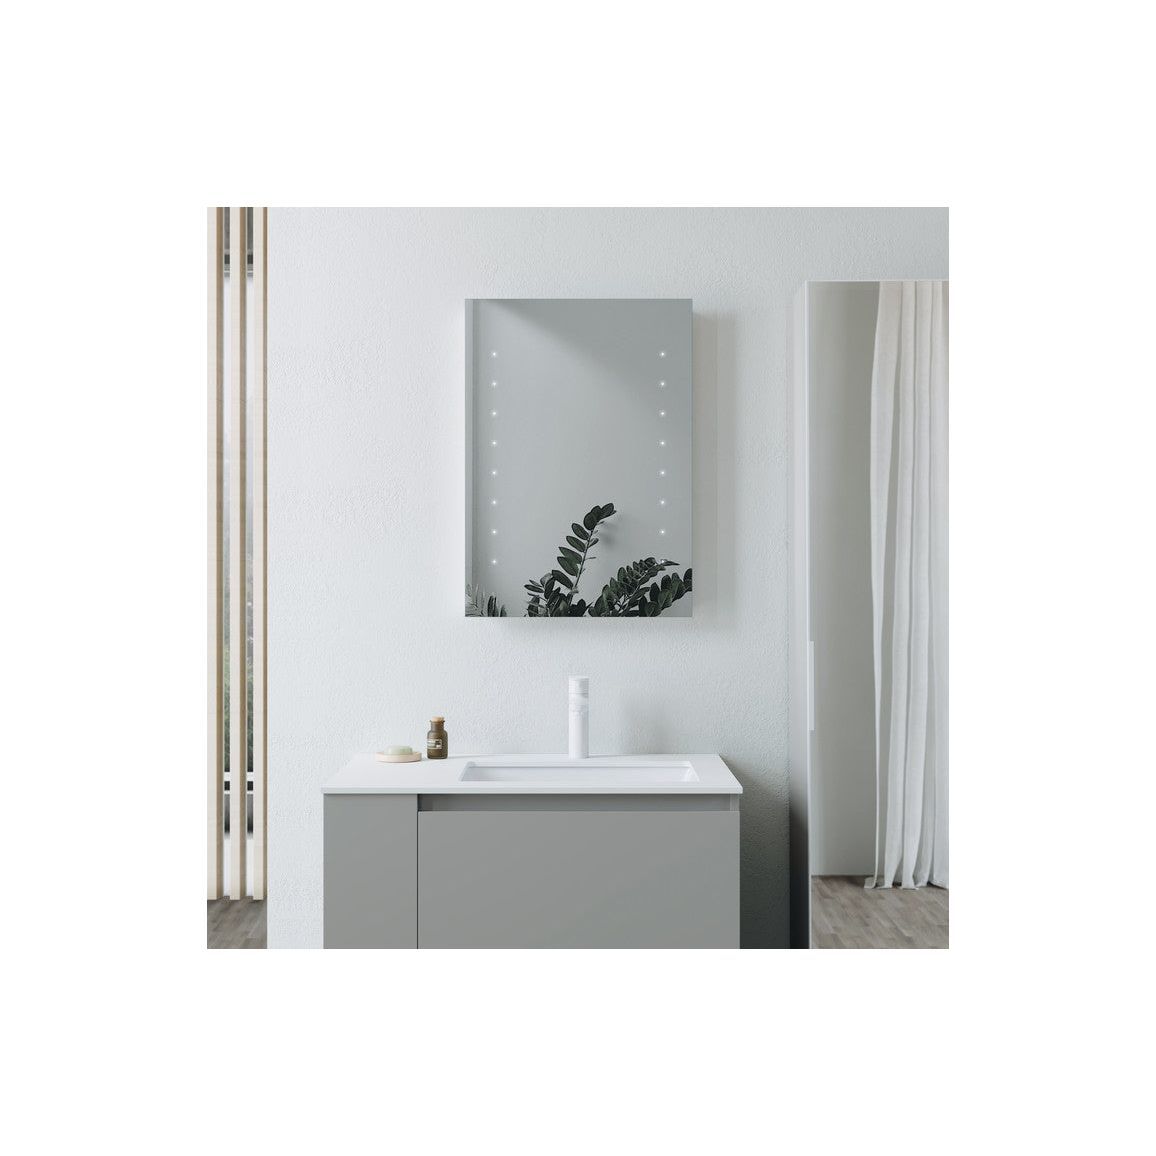 Lena 600x800mm Rectangle Battery-Operated LED Mirror